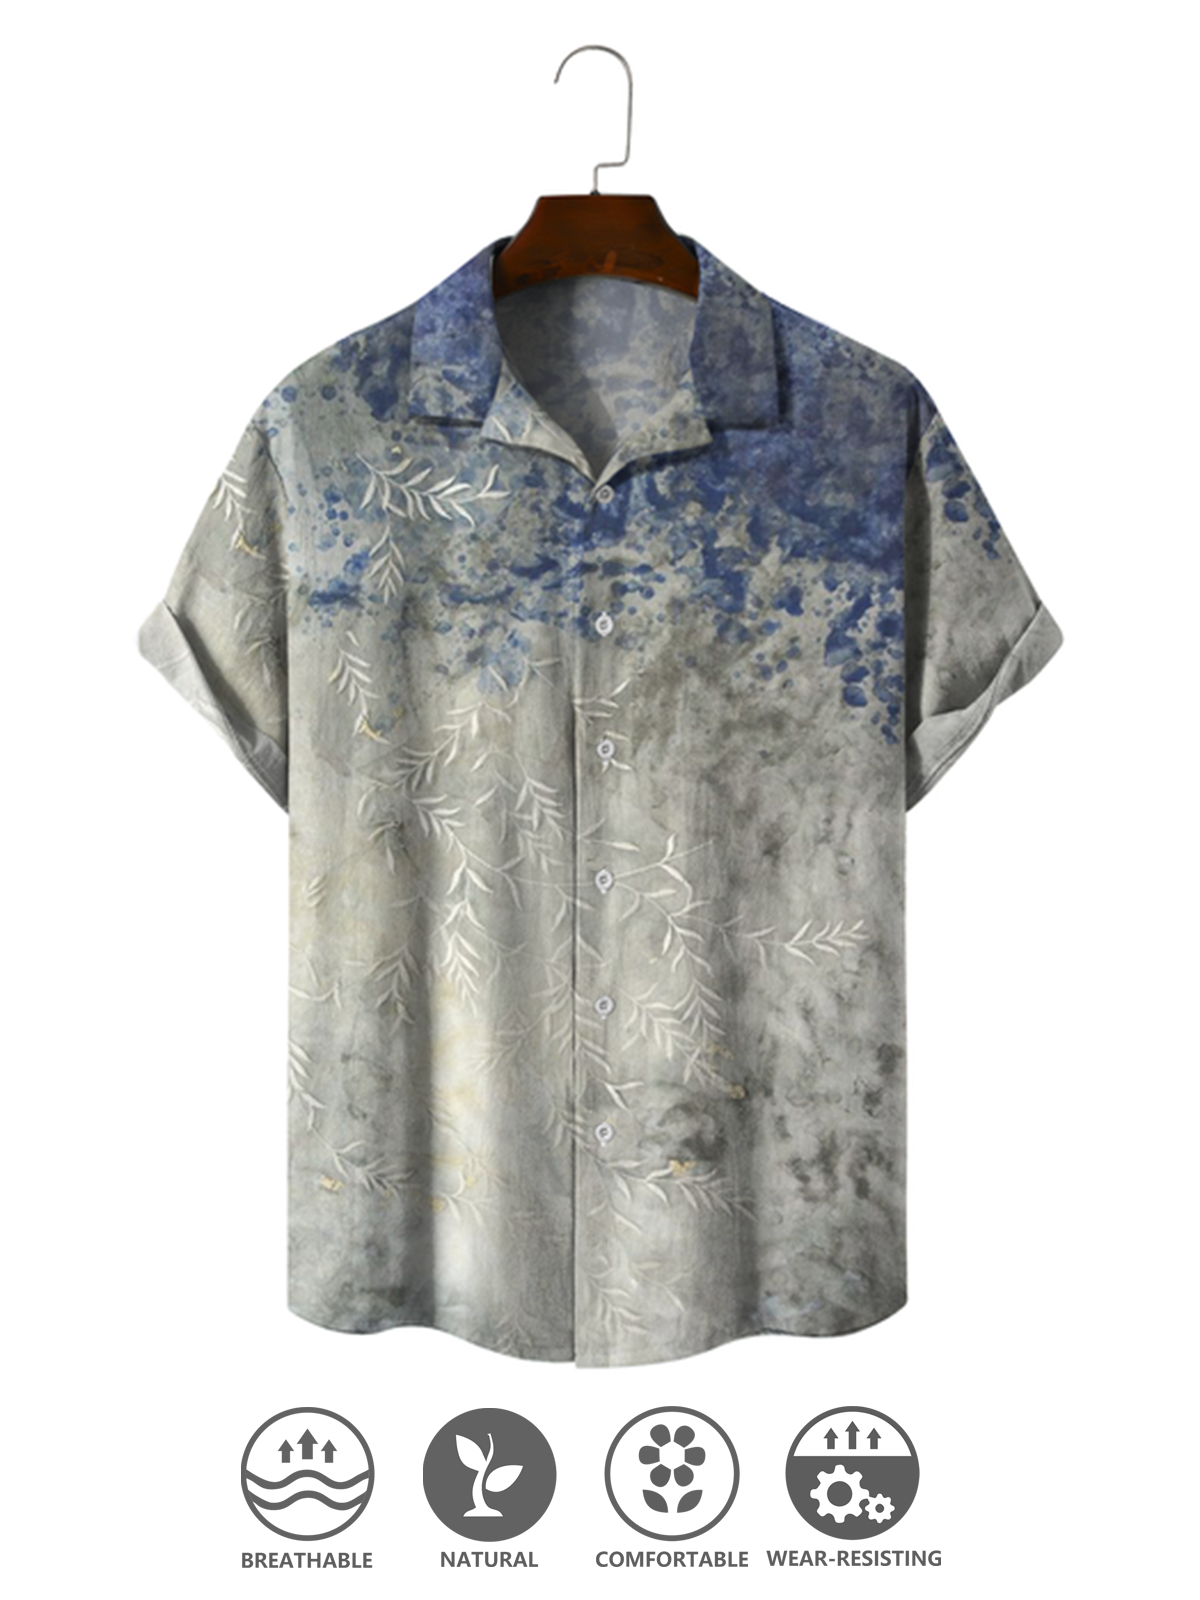 Cozy linen shirt in cotton and linen botanical floral print with lapel collar